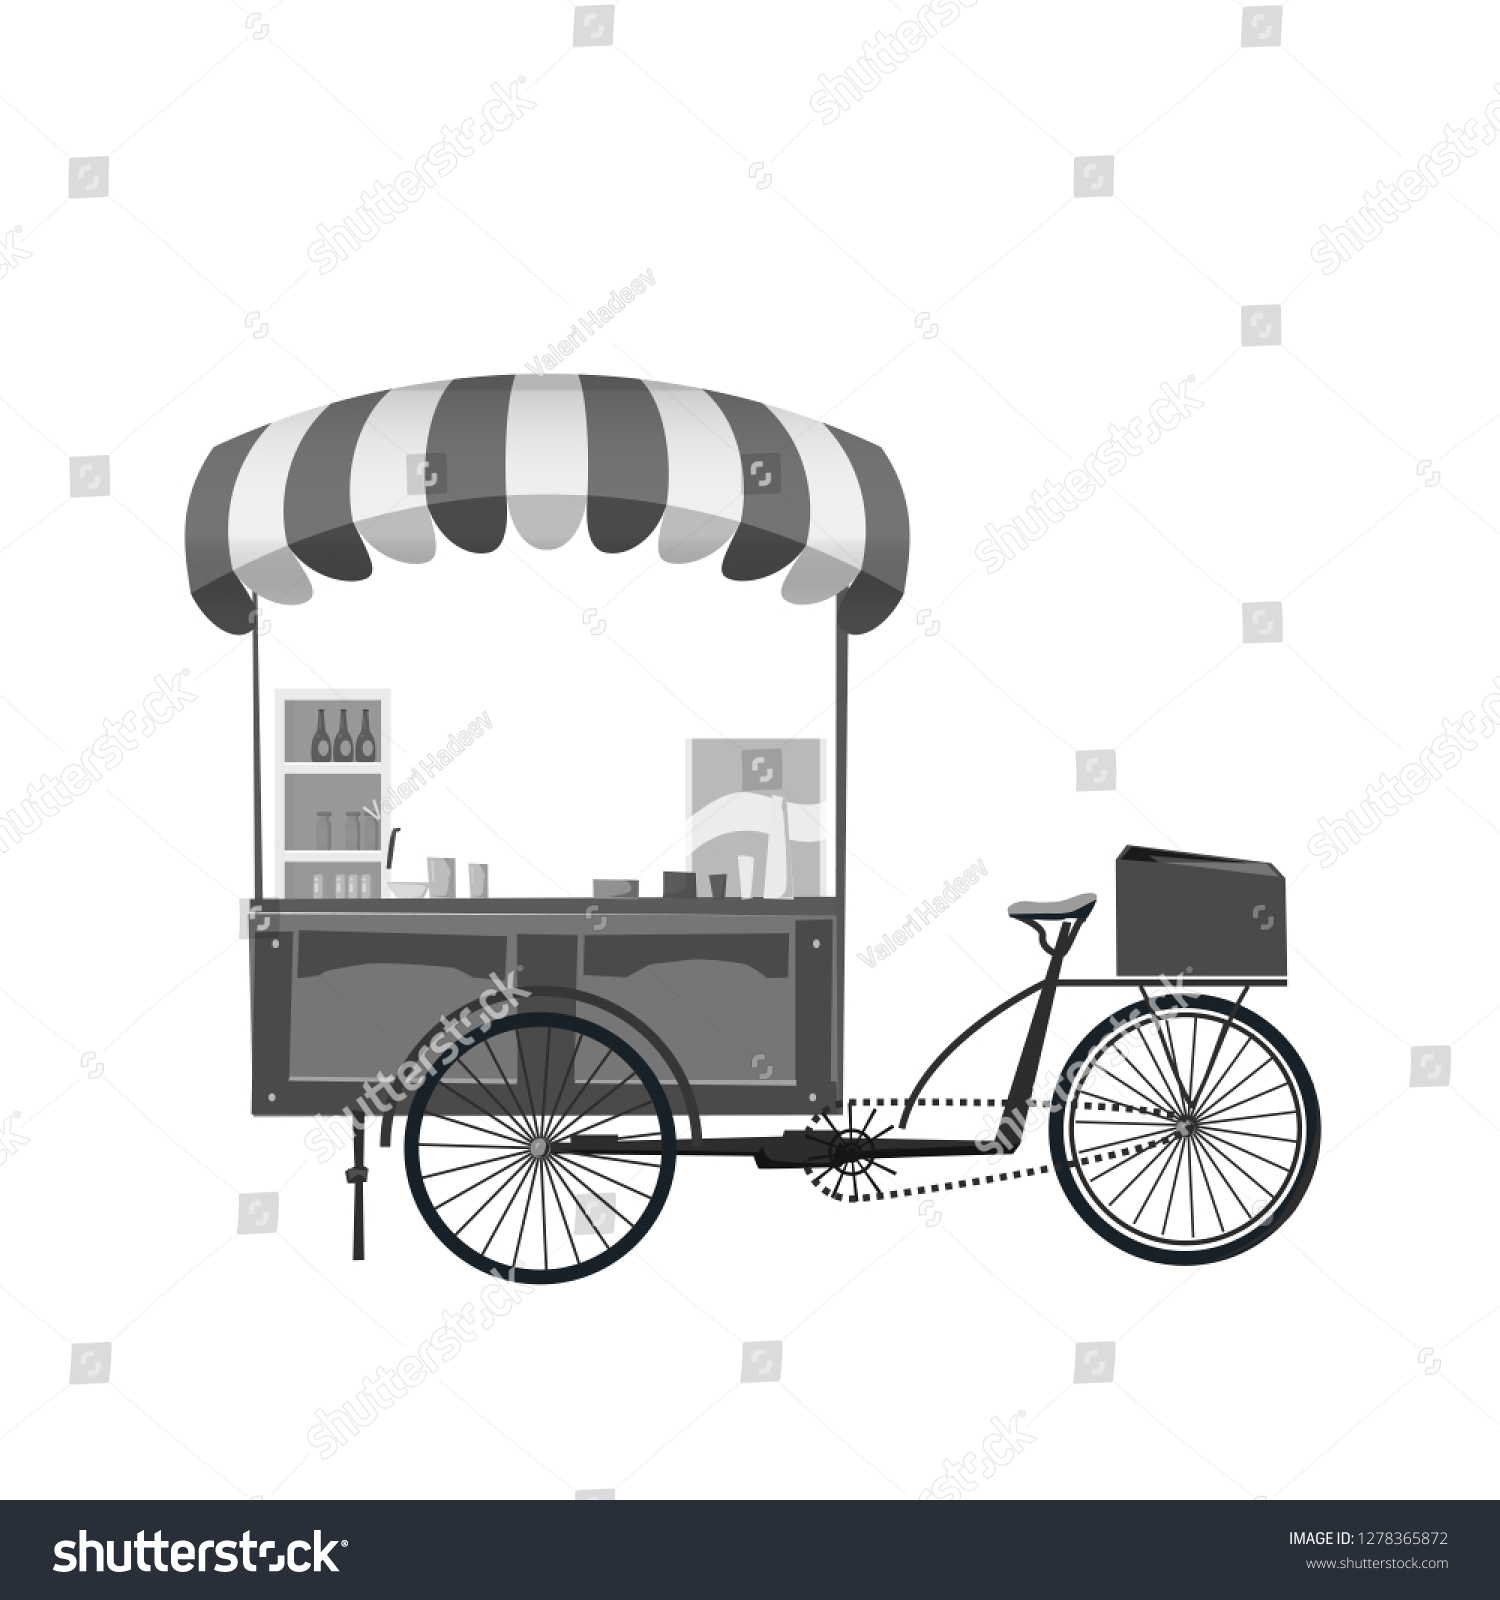 SVG of Street food cart, bike cafe stall with stuff concept vector illustration, template, flat cartoon design style isolated svg